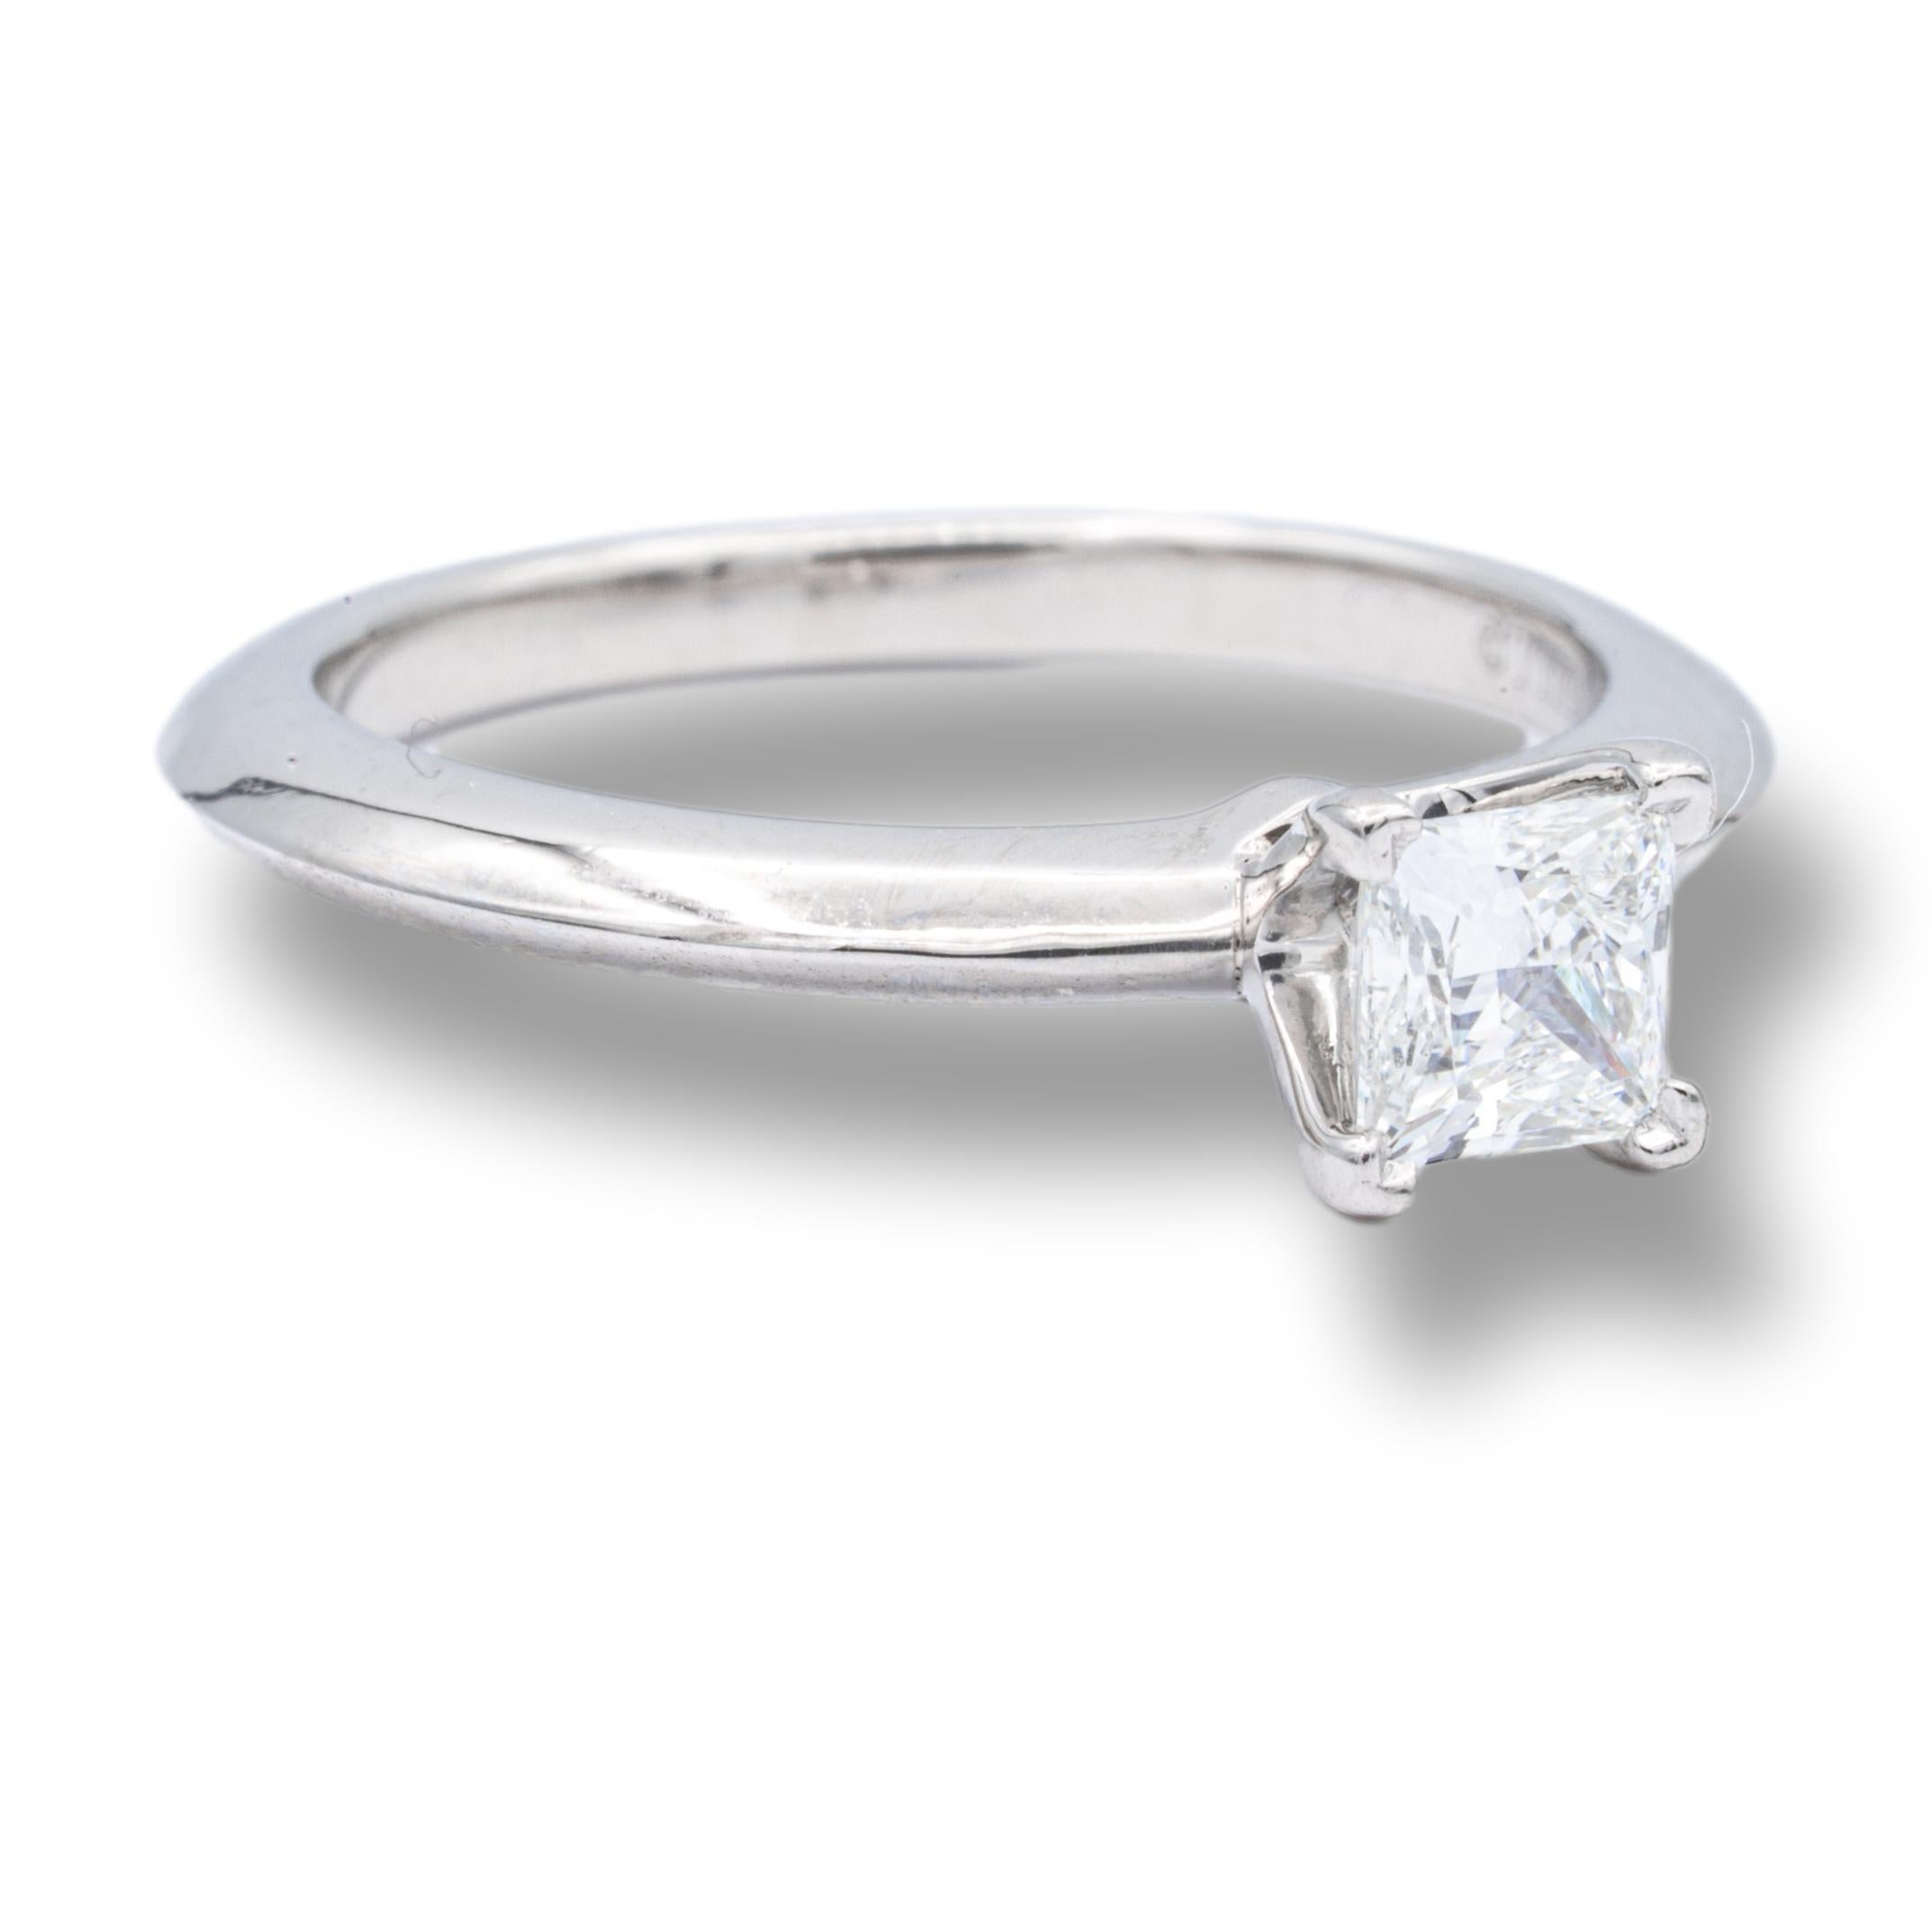 Tiffany & Co. Diamond Engagement ring with Tiffany & Co. Hallmark, featuring a princess cut 0.38 ct Center, graded G color , and VS1 Clarity, in Platinum.    This diamond Includes a GIA certificate with report number 2213855906 and a grading of G